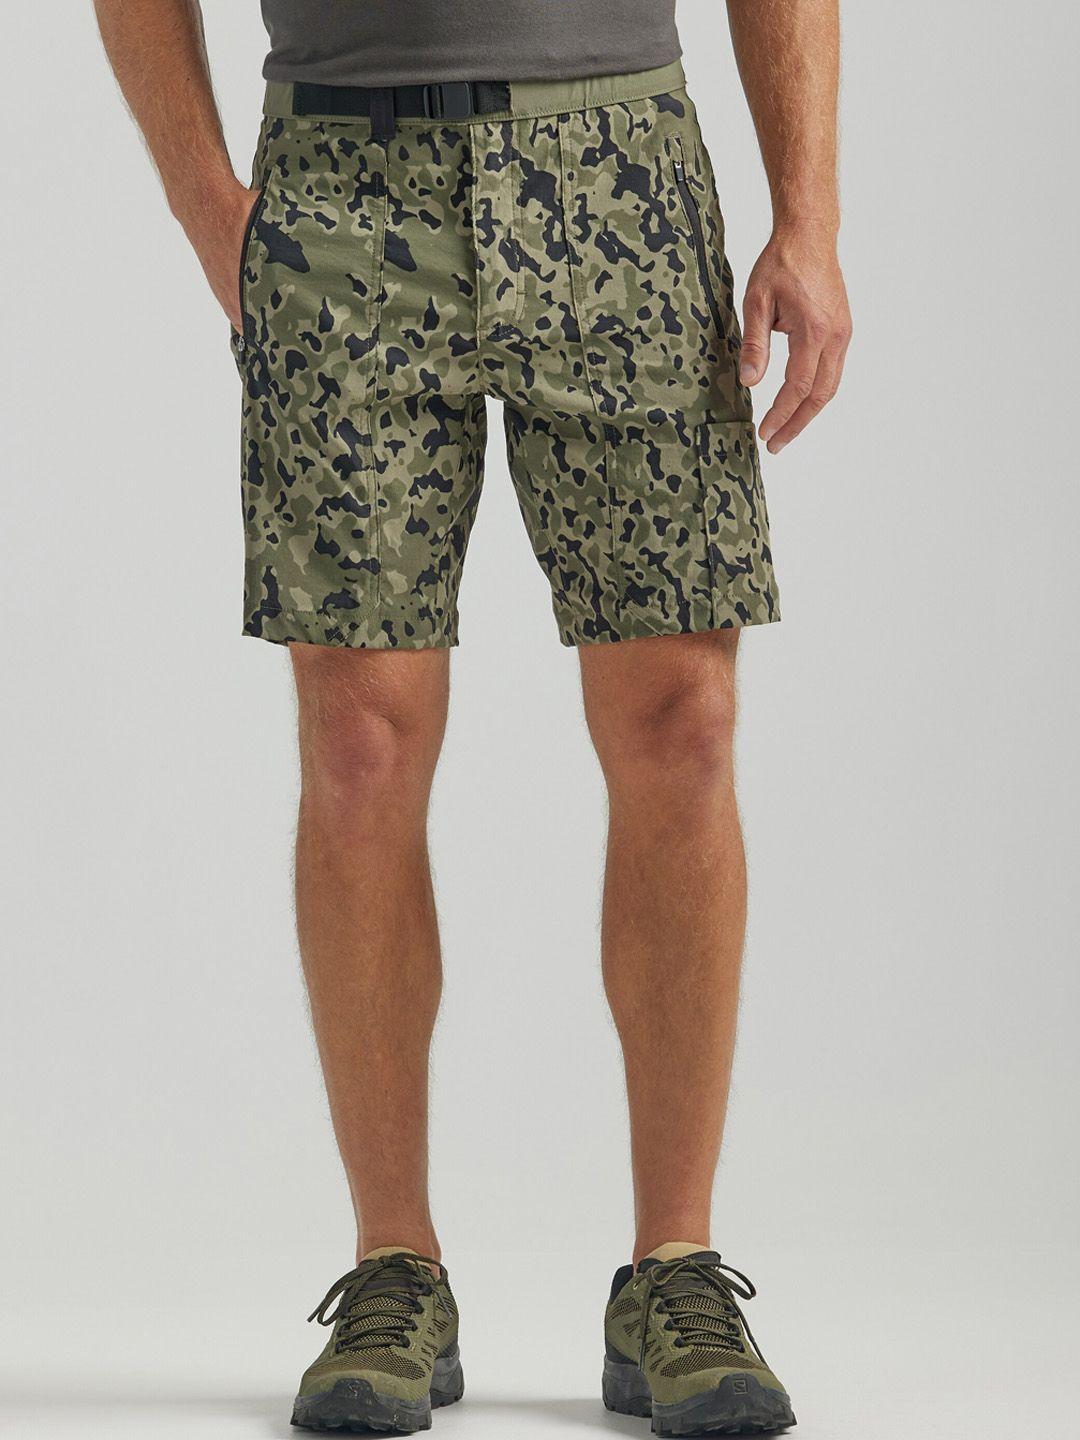 wrangler-men-abstract-printed-mid-rise-cotton-sports-shorts